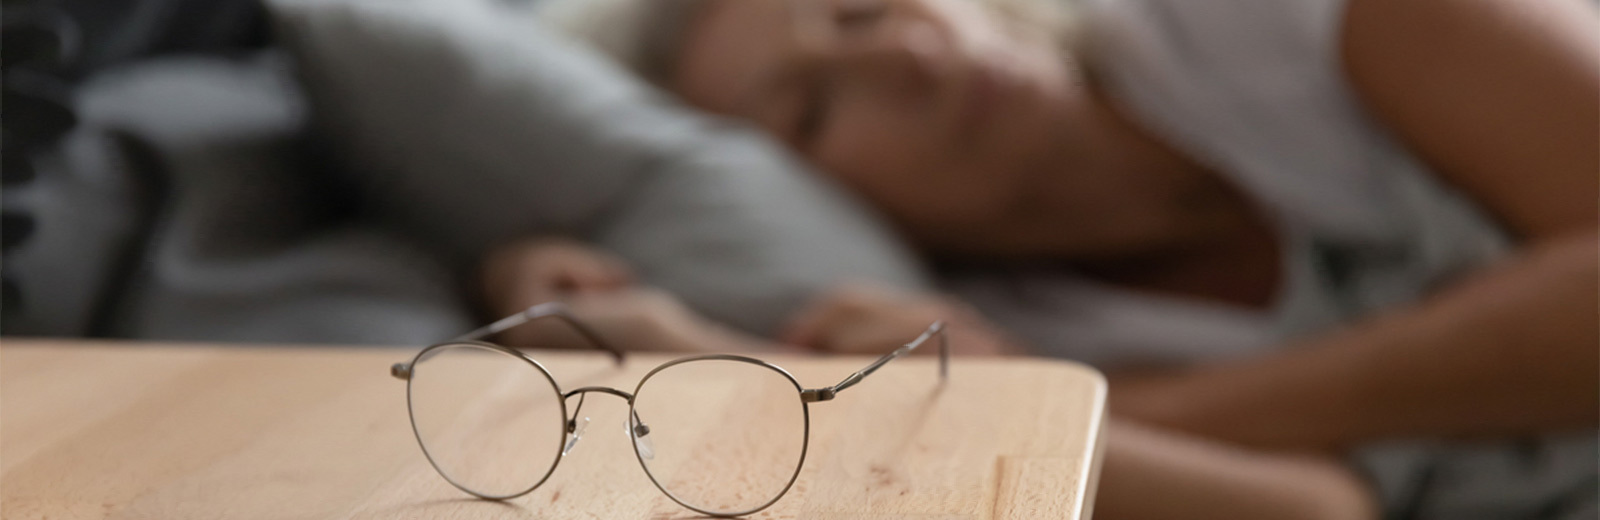 Sleep and Aging – How many zzz’s do elderly people need on average?